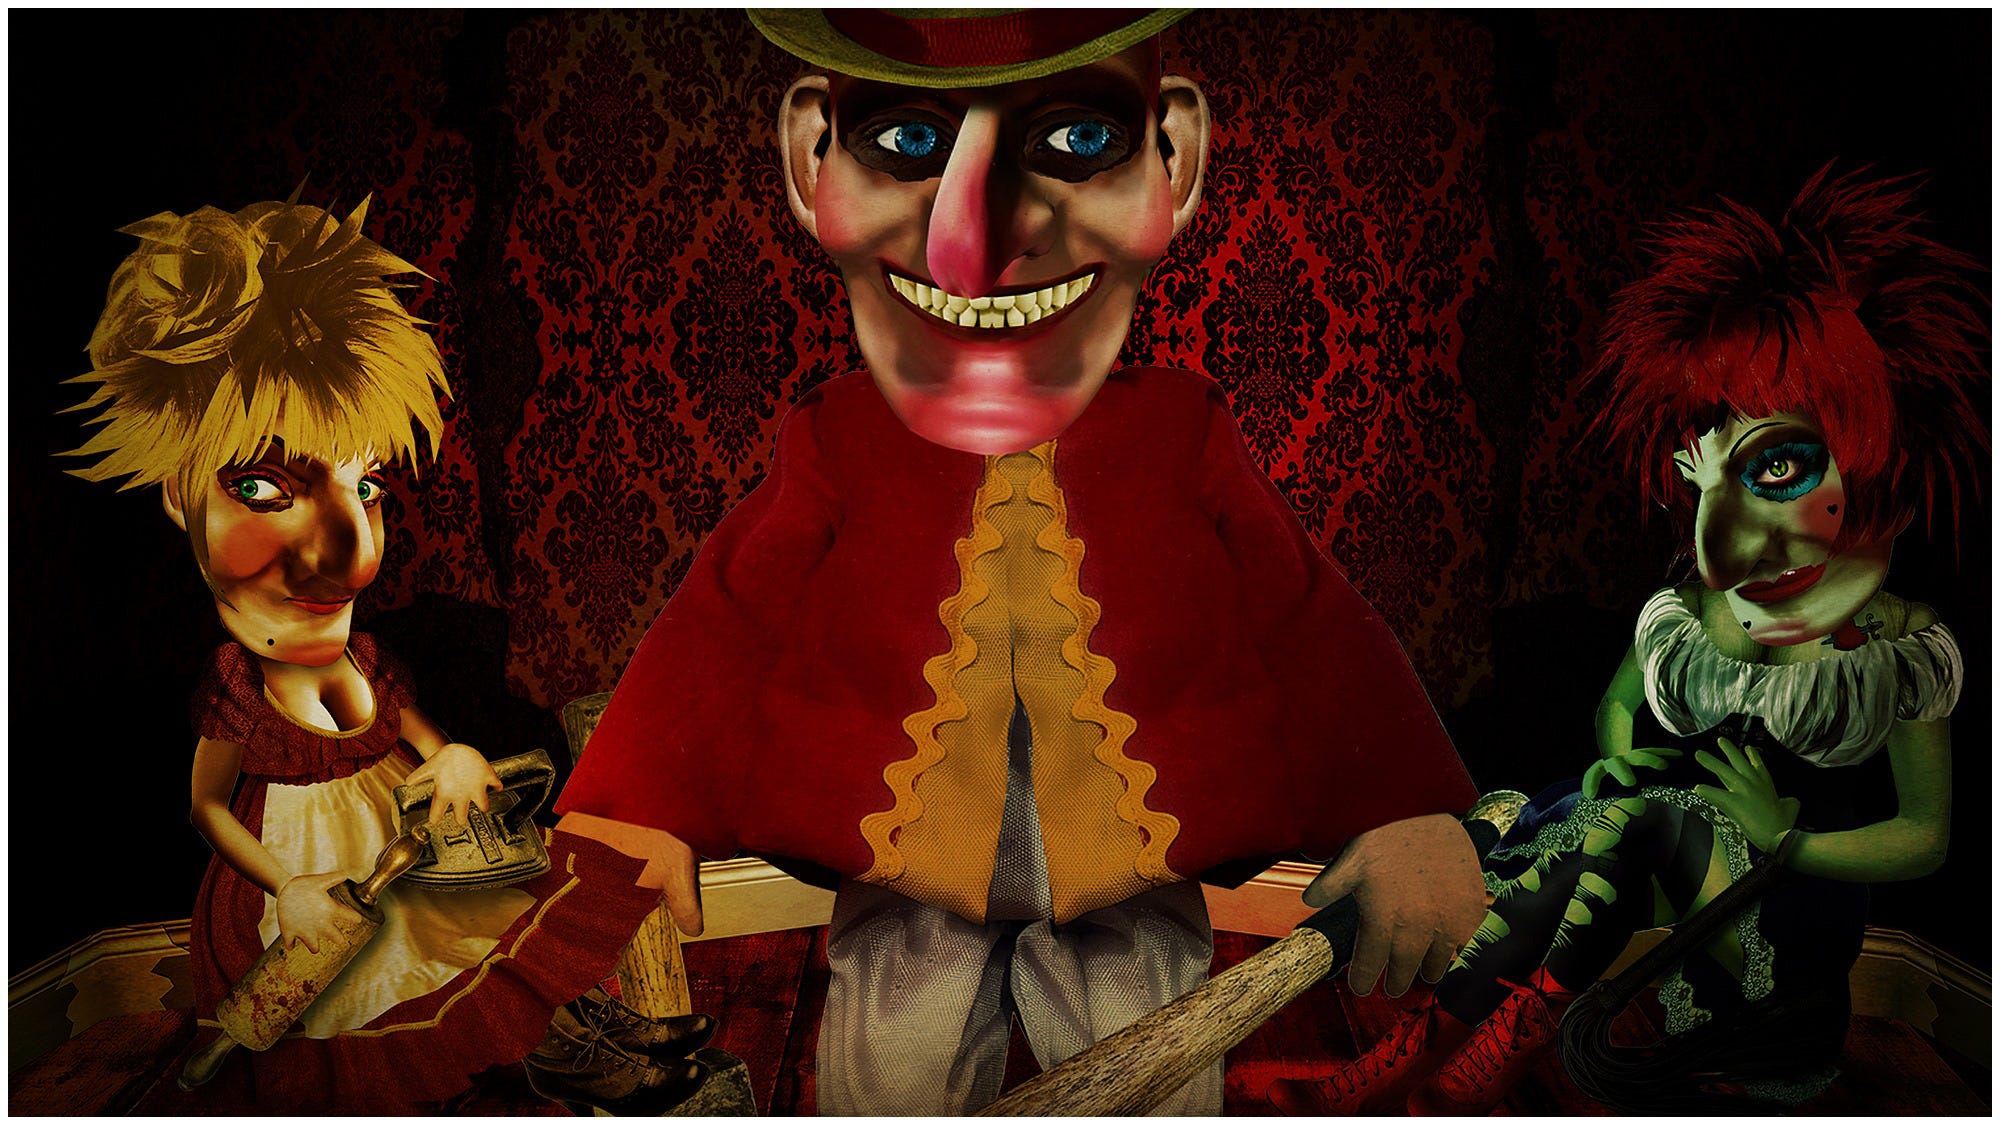 A sinister Gothic representation of three Punch and Judy characters.